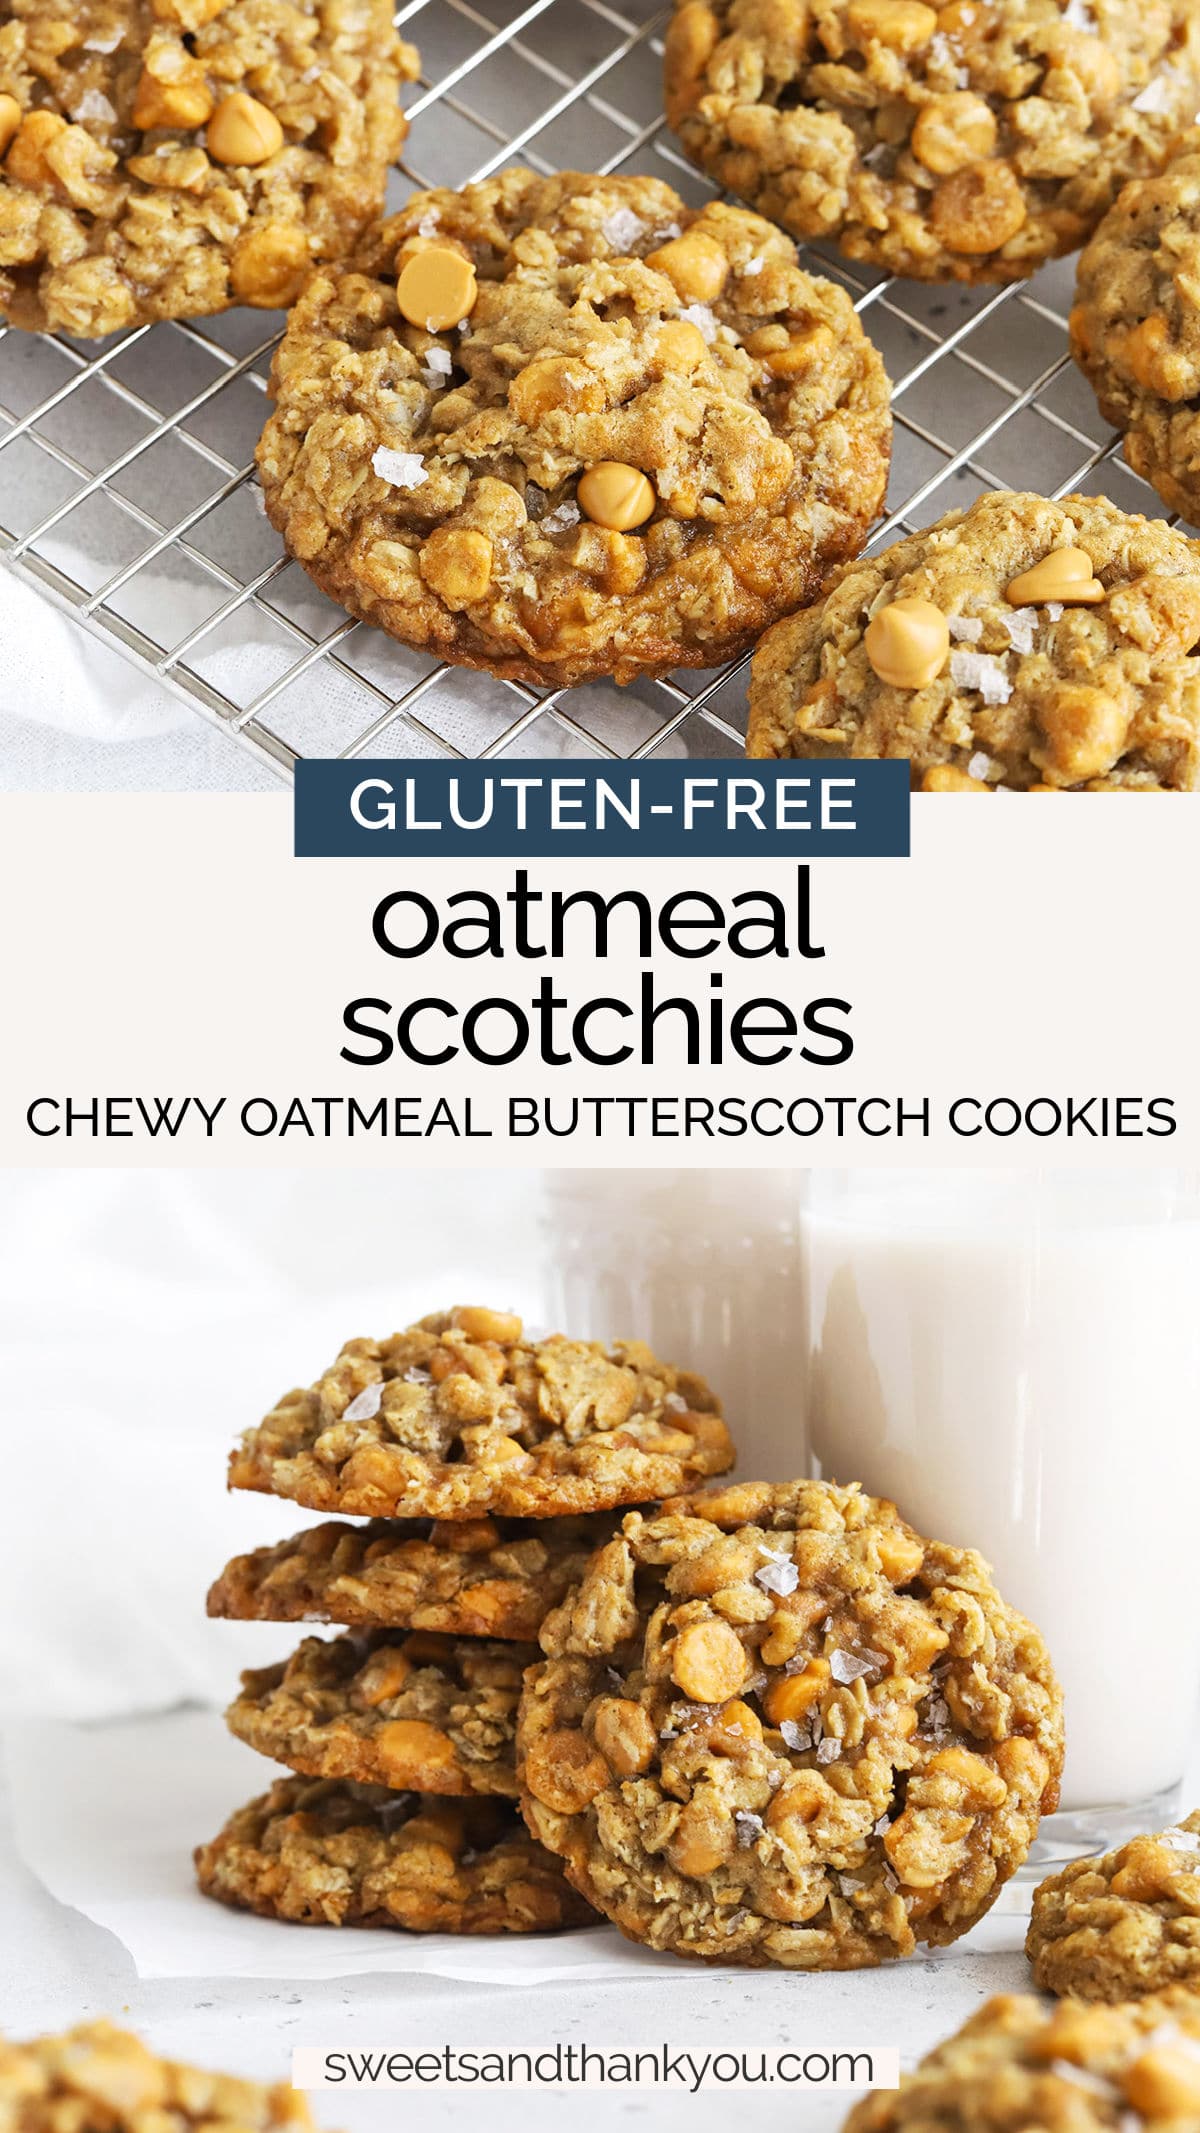 Gluten-Free Oatmeal Butterscotch Cookies - Easy, chewy gluten-free oatmeal scotchies cookies are loaded with flavor & have the best texture! // the best oatmeal scotchies recipe // gluten-free oatmeal cookies recipe // chewy oatmeal cookies // gluten free cookies // butterscotch cookies // gluten free butterscotch cookies //